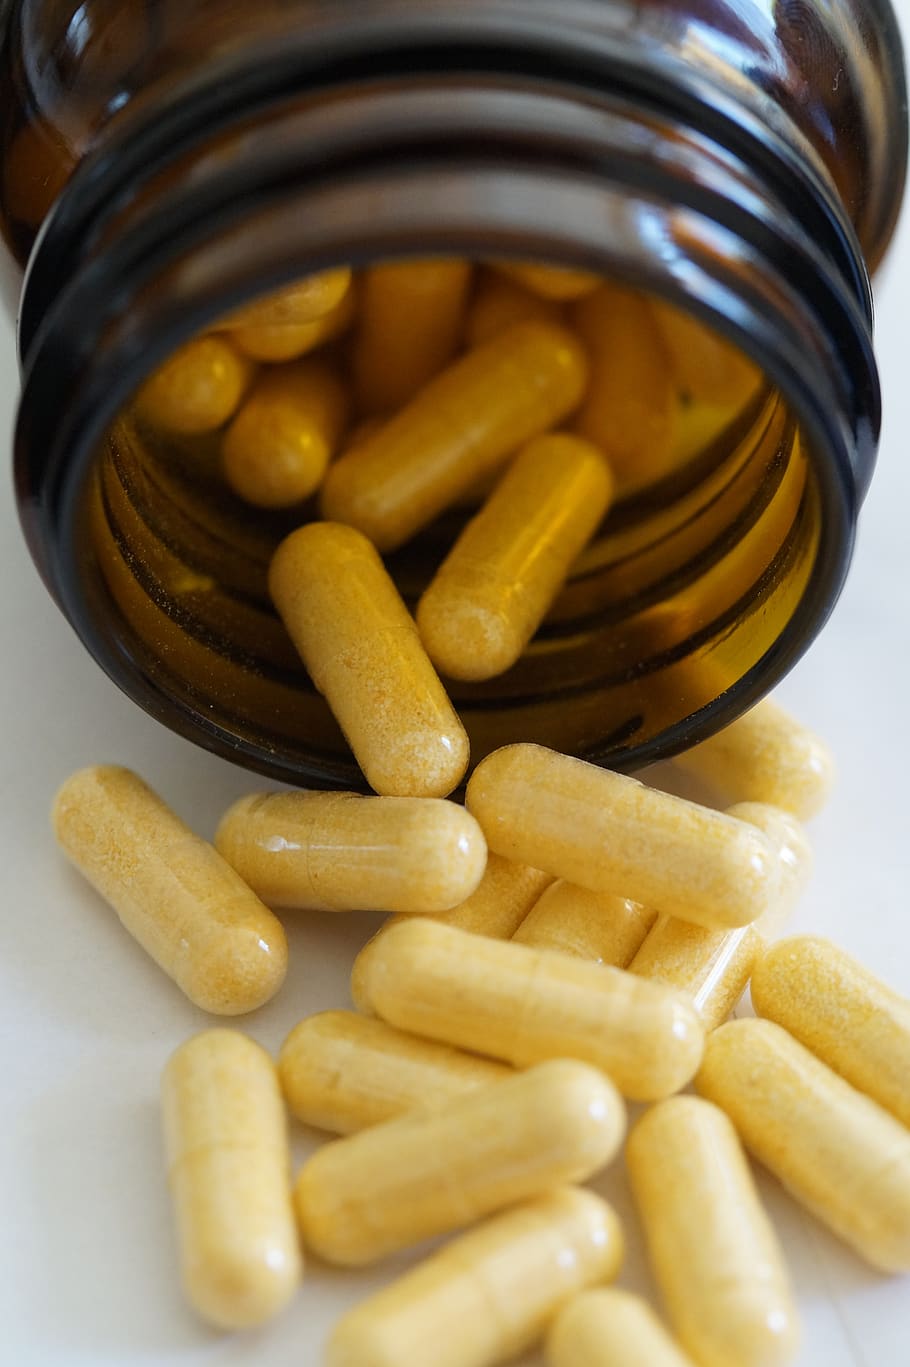 dietary supplements, pills, encapsulate, nutrient additives, tablets, medical, disease, drug, health, healthy